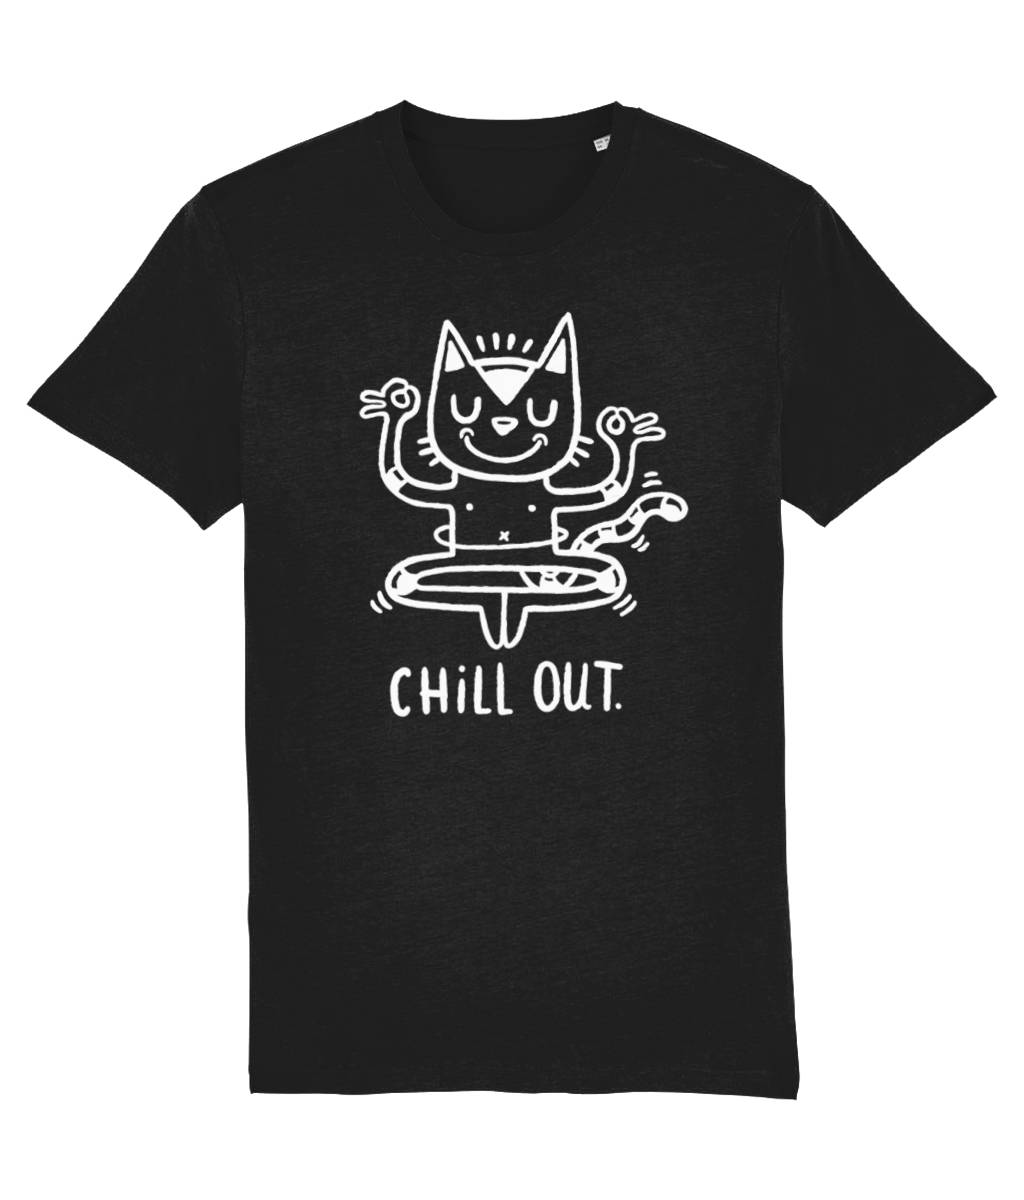 'Chill Out' Unisex Black T-Shirt